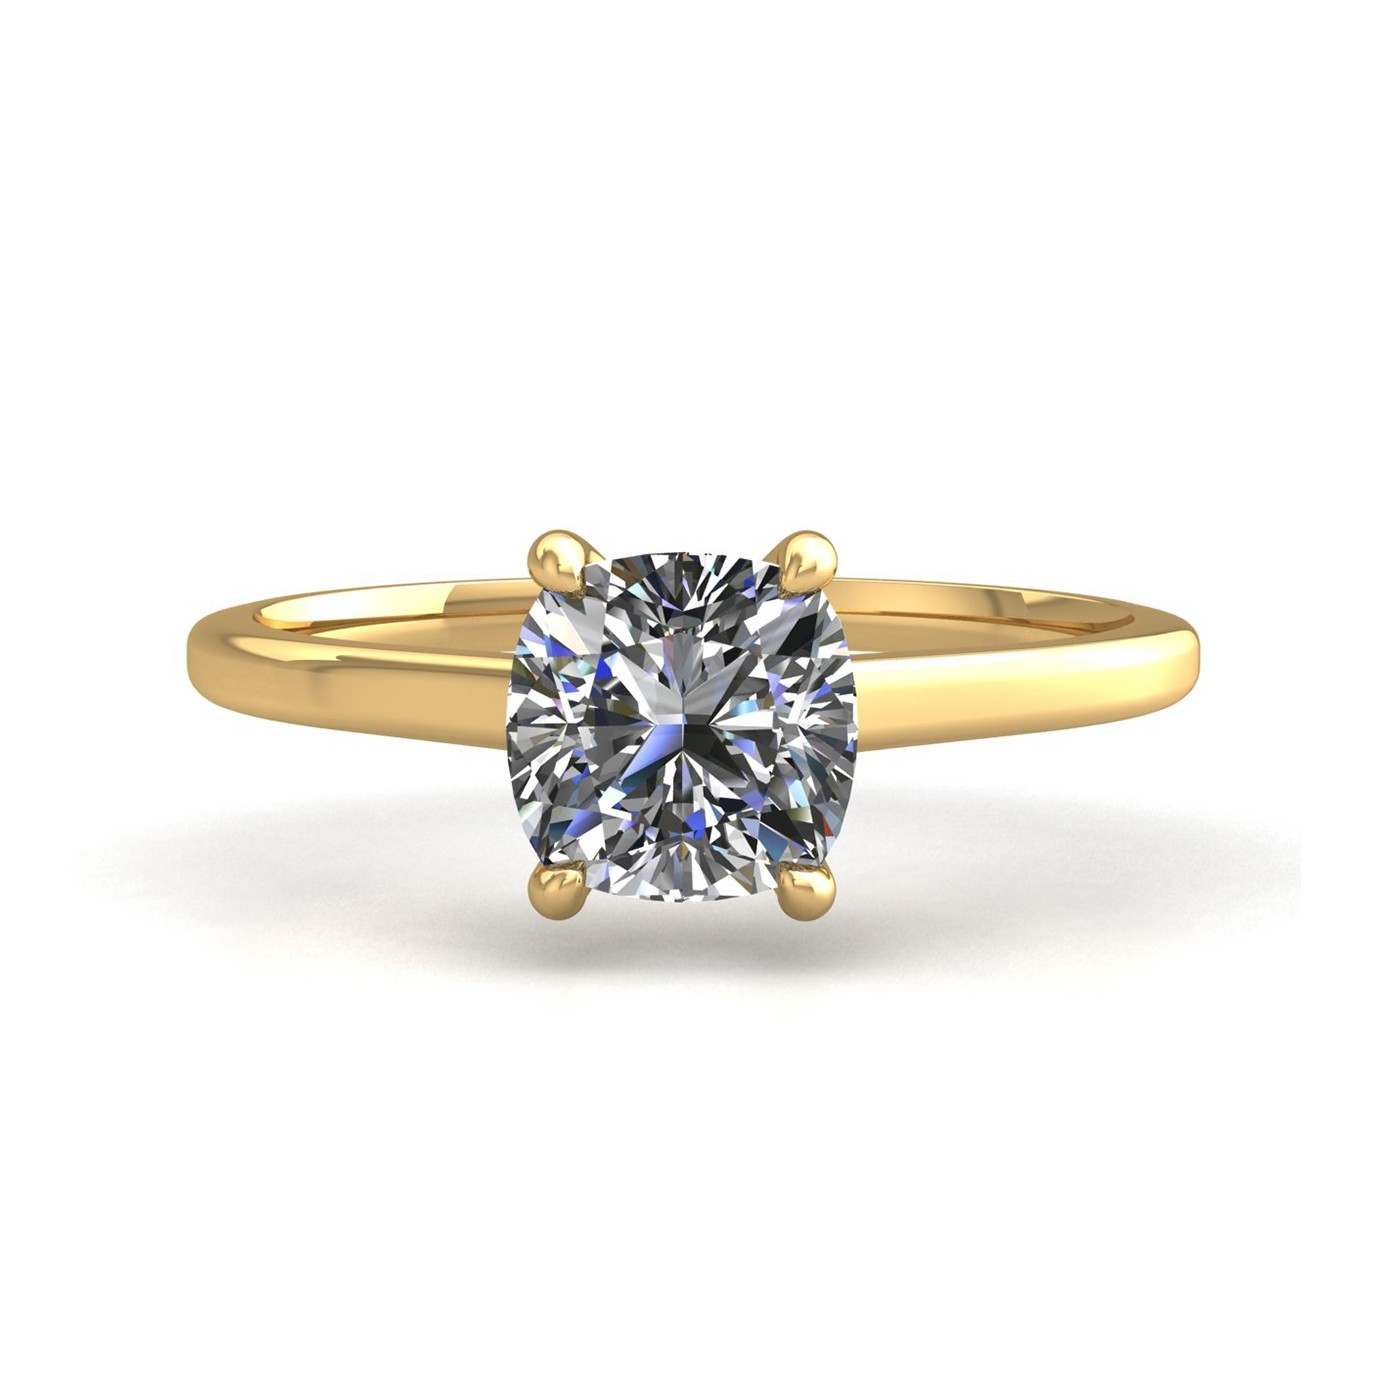 18k yellow gold 1.5ct 4 prongs solitaire cushion cut diamond engagement ring with whisper thin band Photos & images